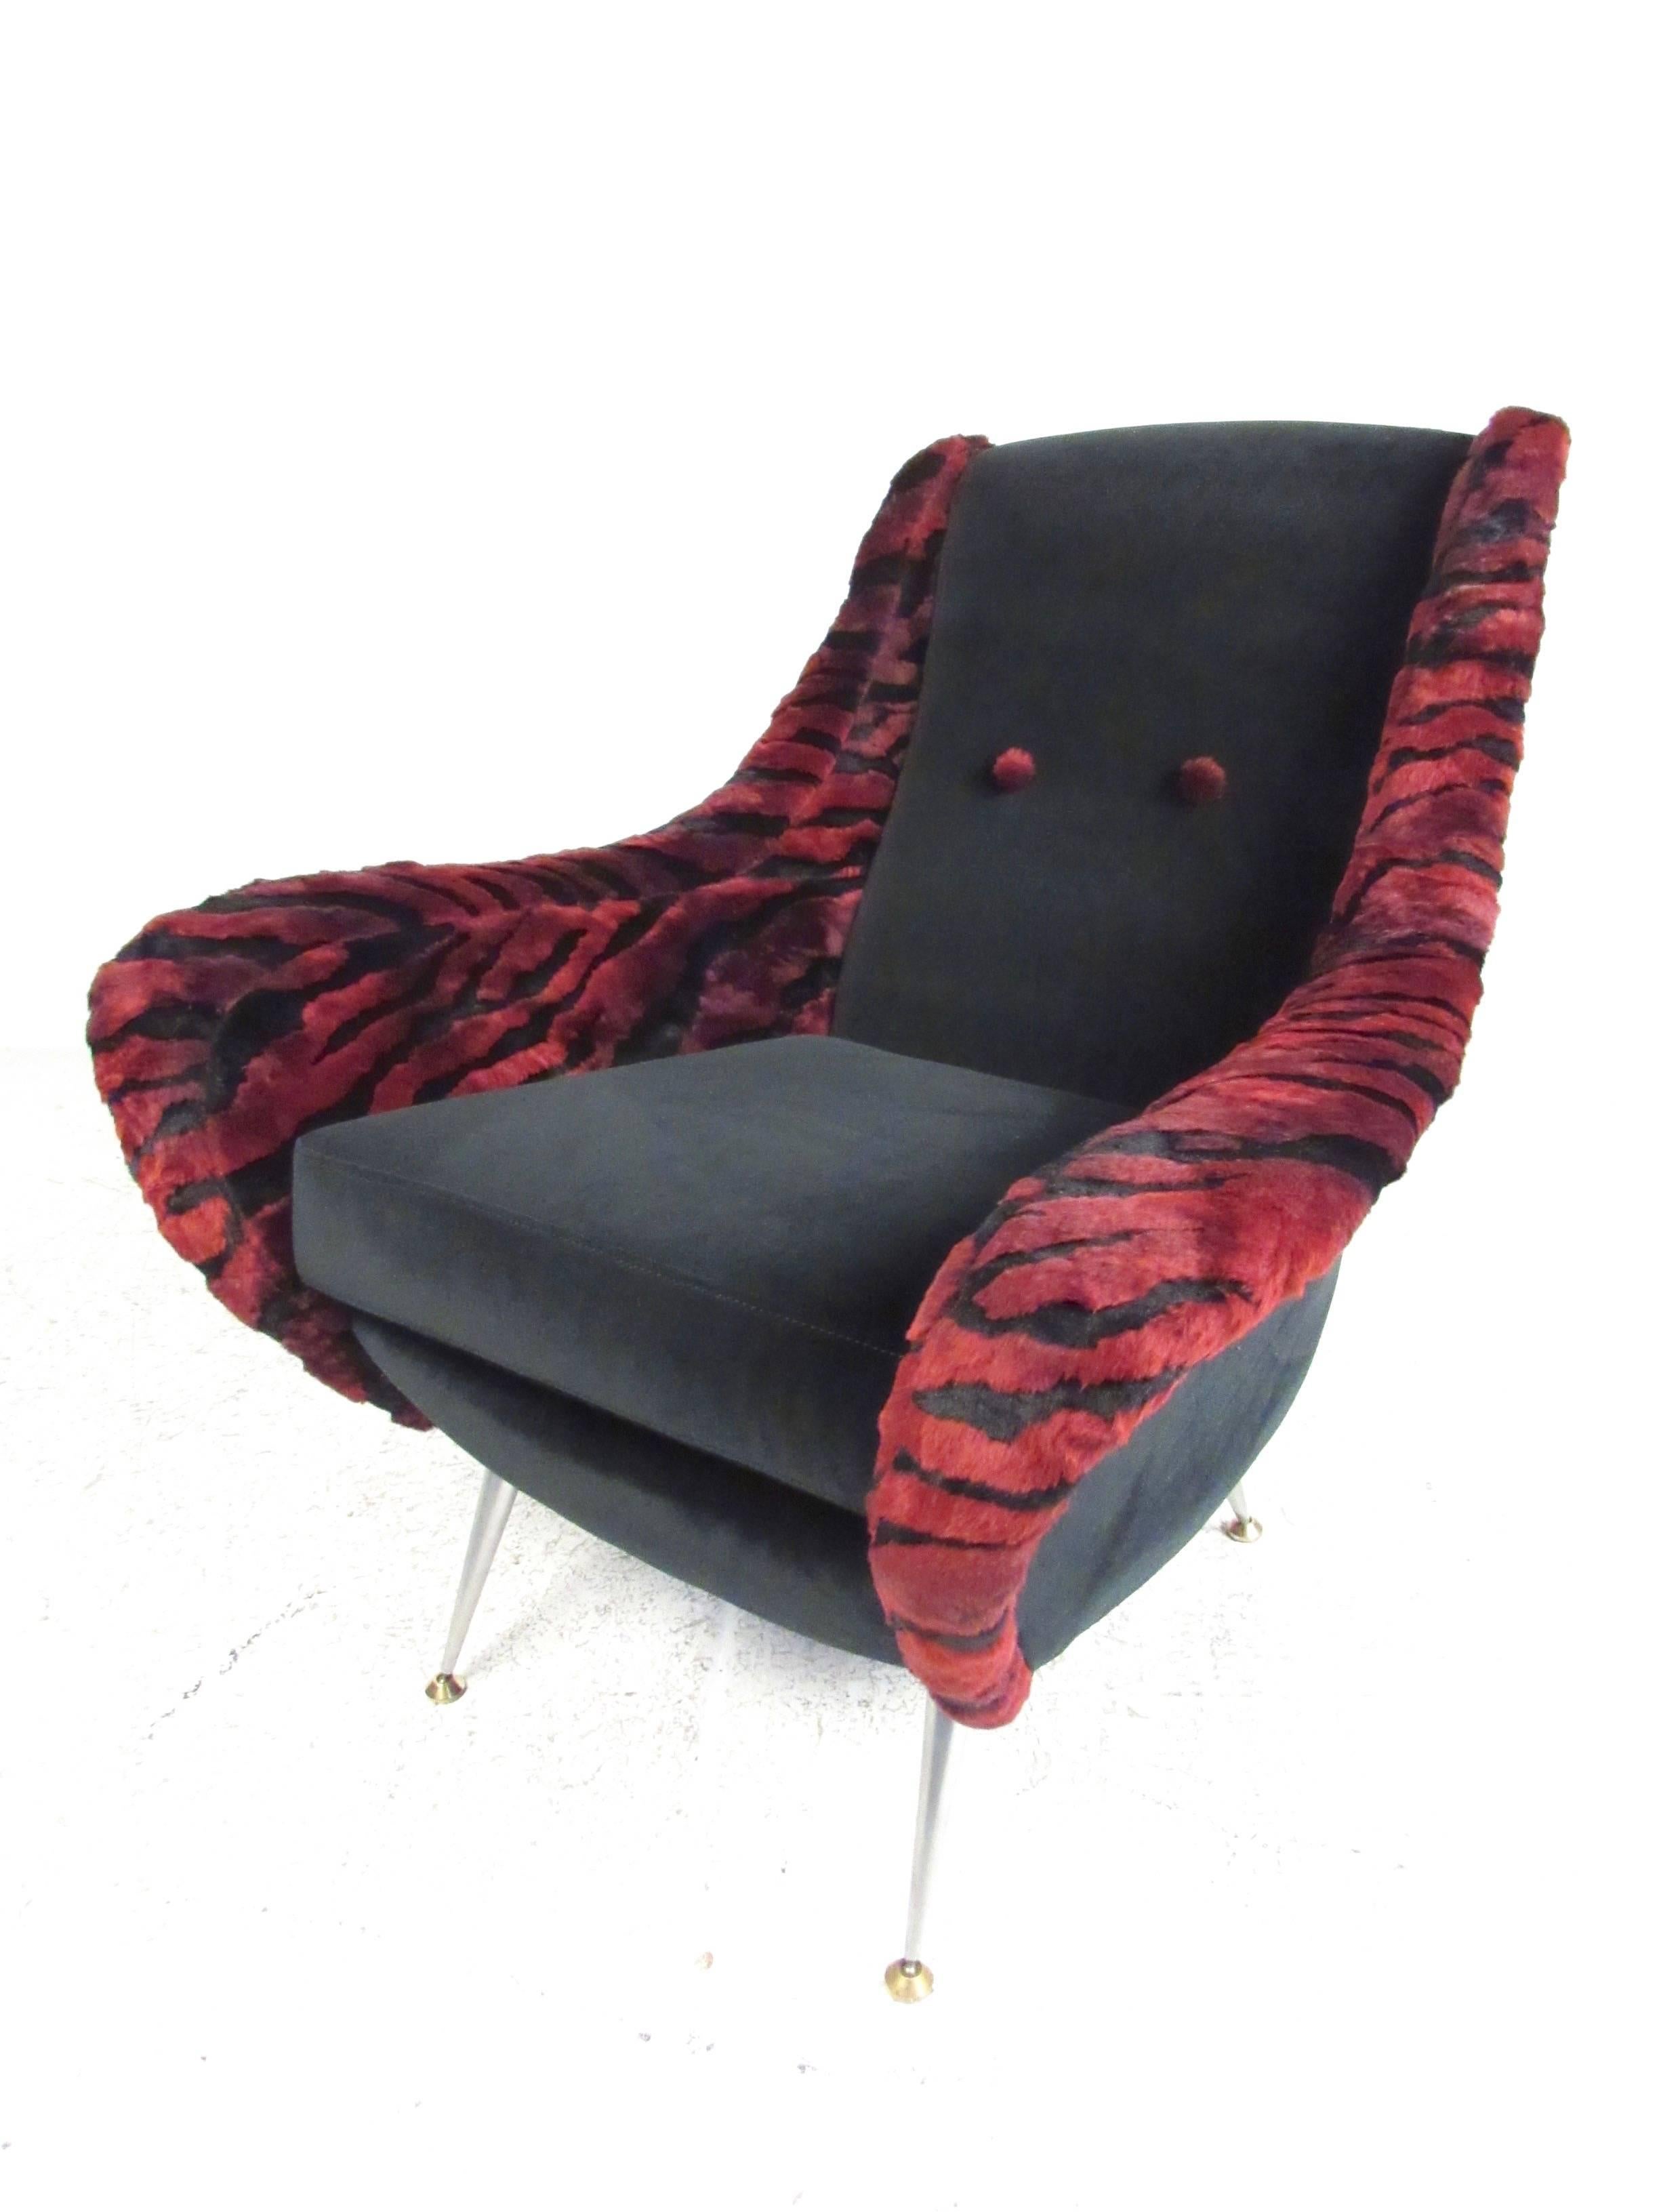 This sleek and stylish pair of Italian modern lounge chairs feature tapered aluminium legs with unique two-tone upholstered. Plush tufted fabric features funky tiger print trim, while the sculpted back and arm rests add to the style and comfort of